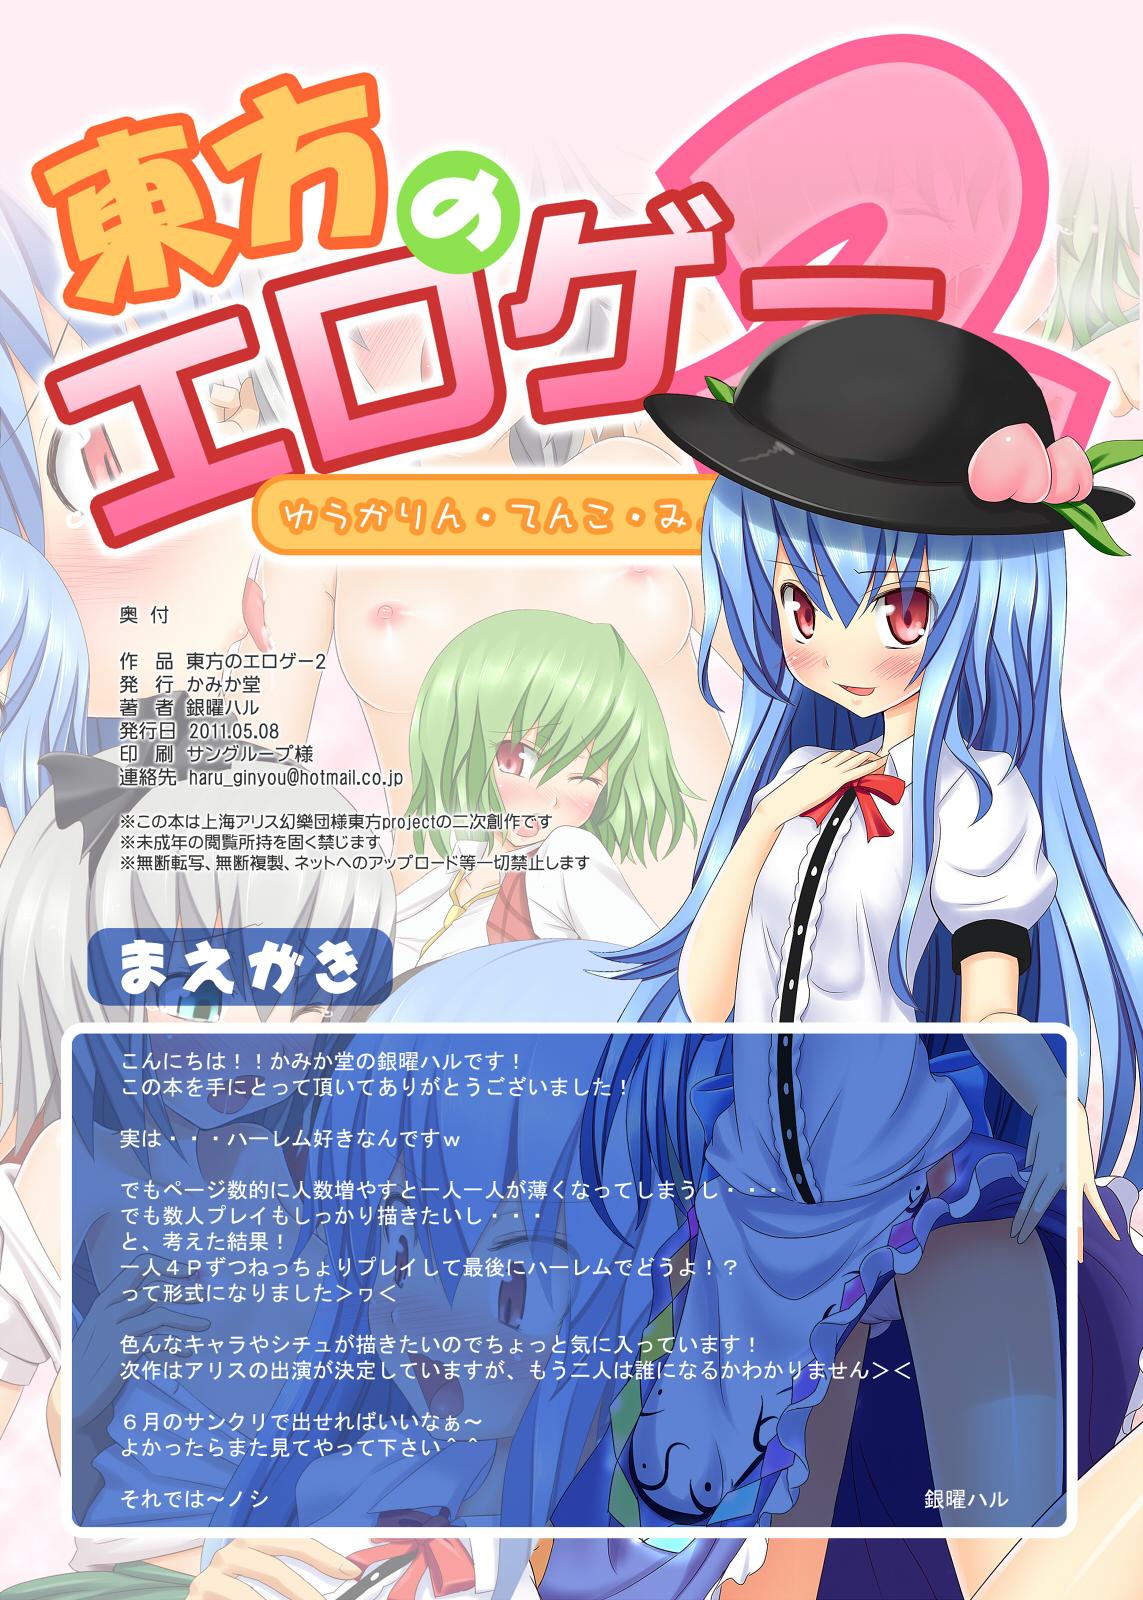 Tight Ass Touhou no Eroge 2 - Touhou project Caliente - Page 2